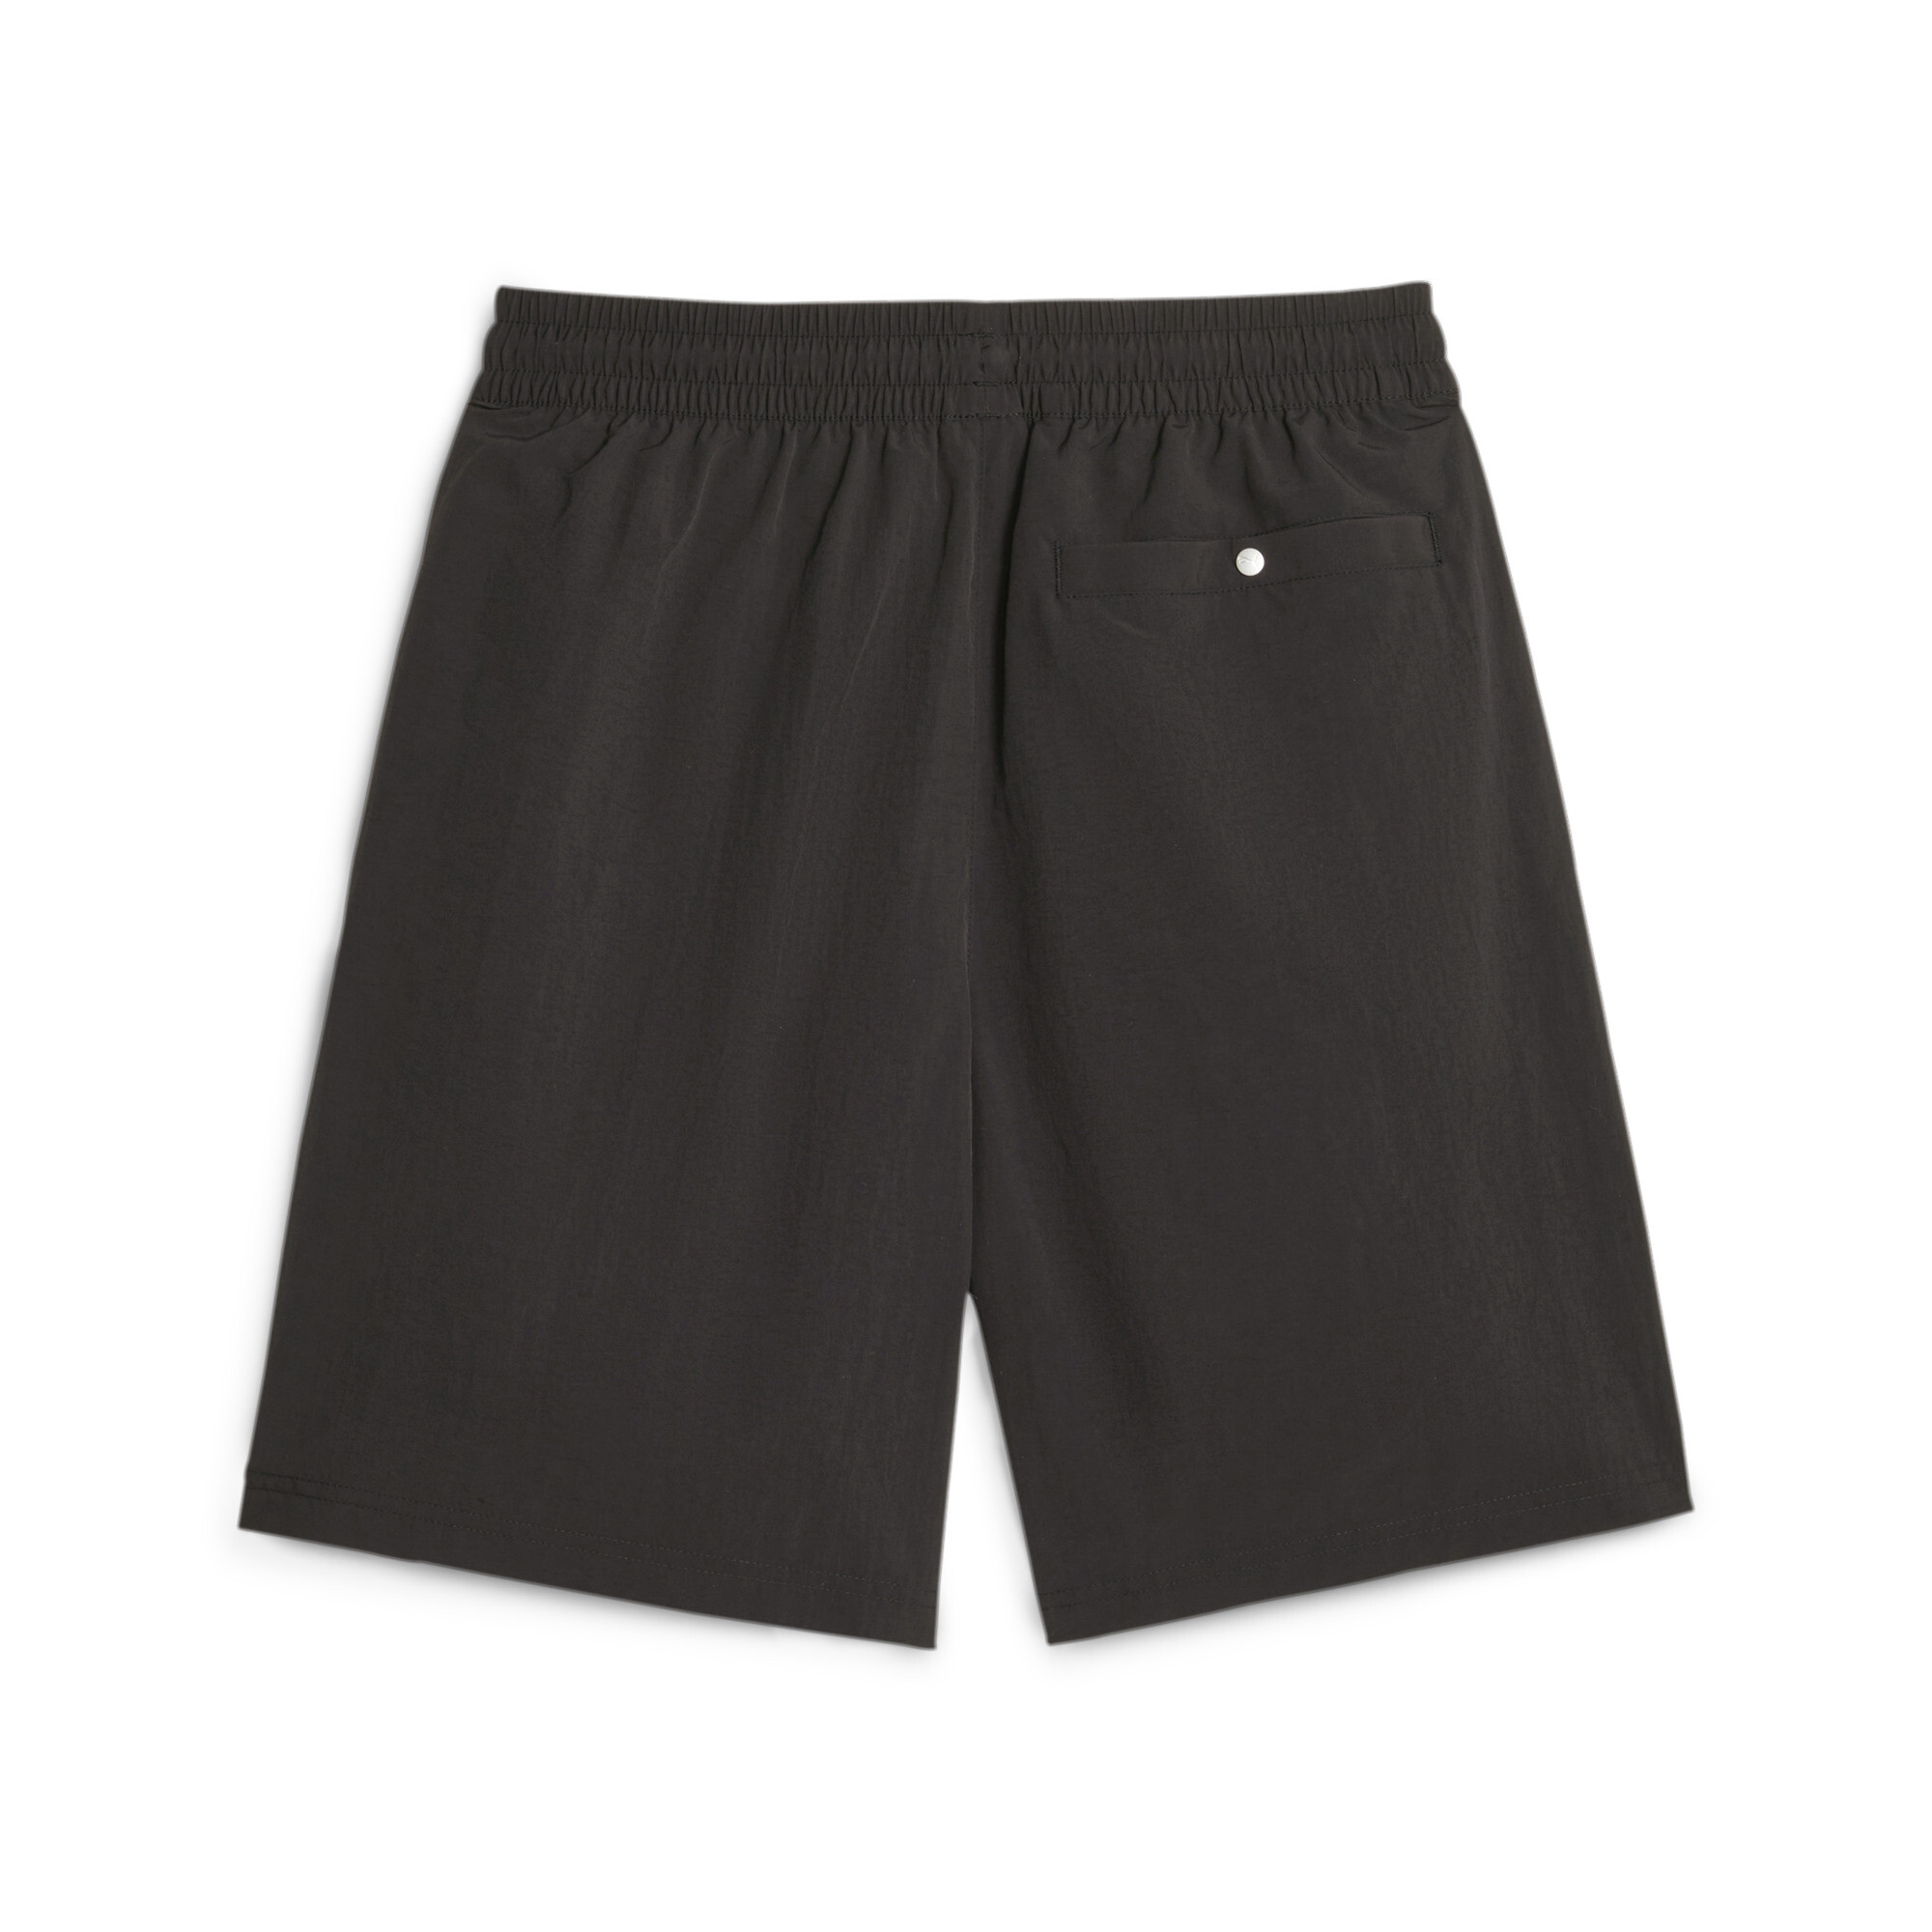 Men's PUMA TEAM Relaxed Shorts In Black, Size Large